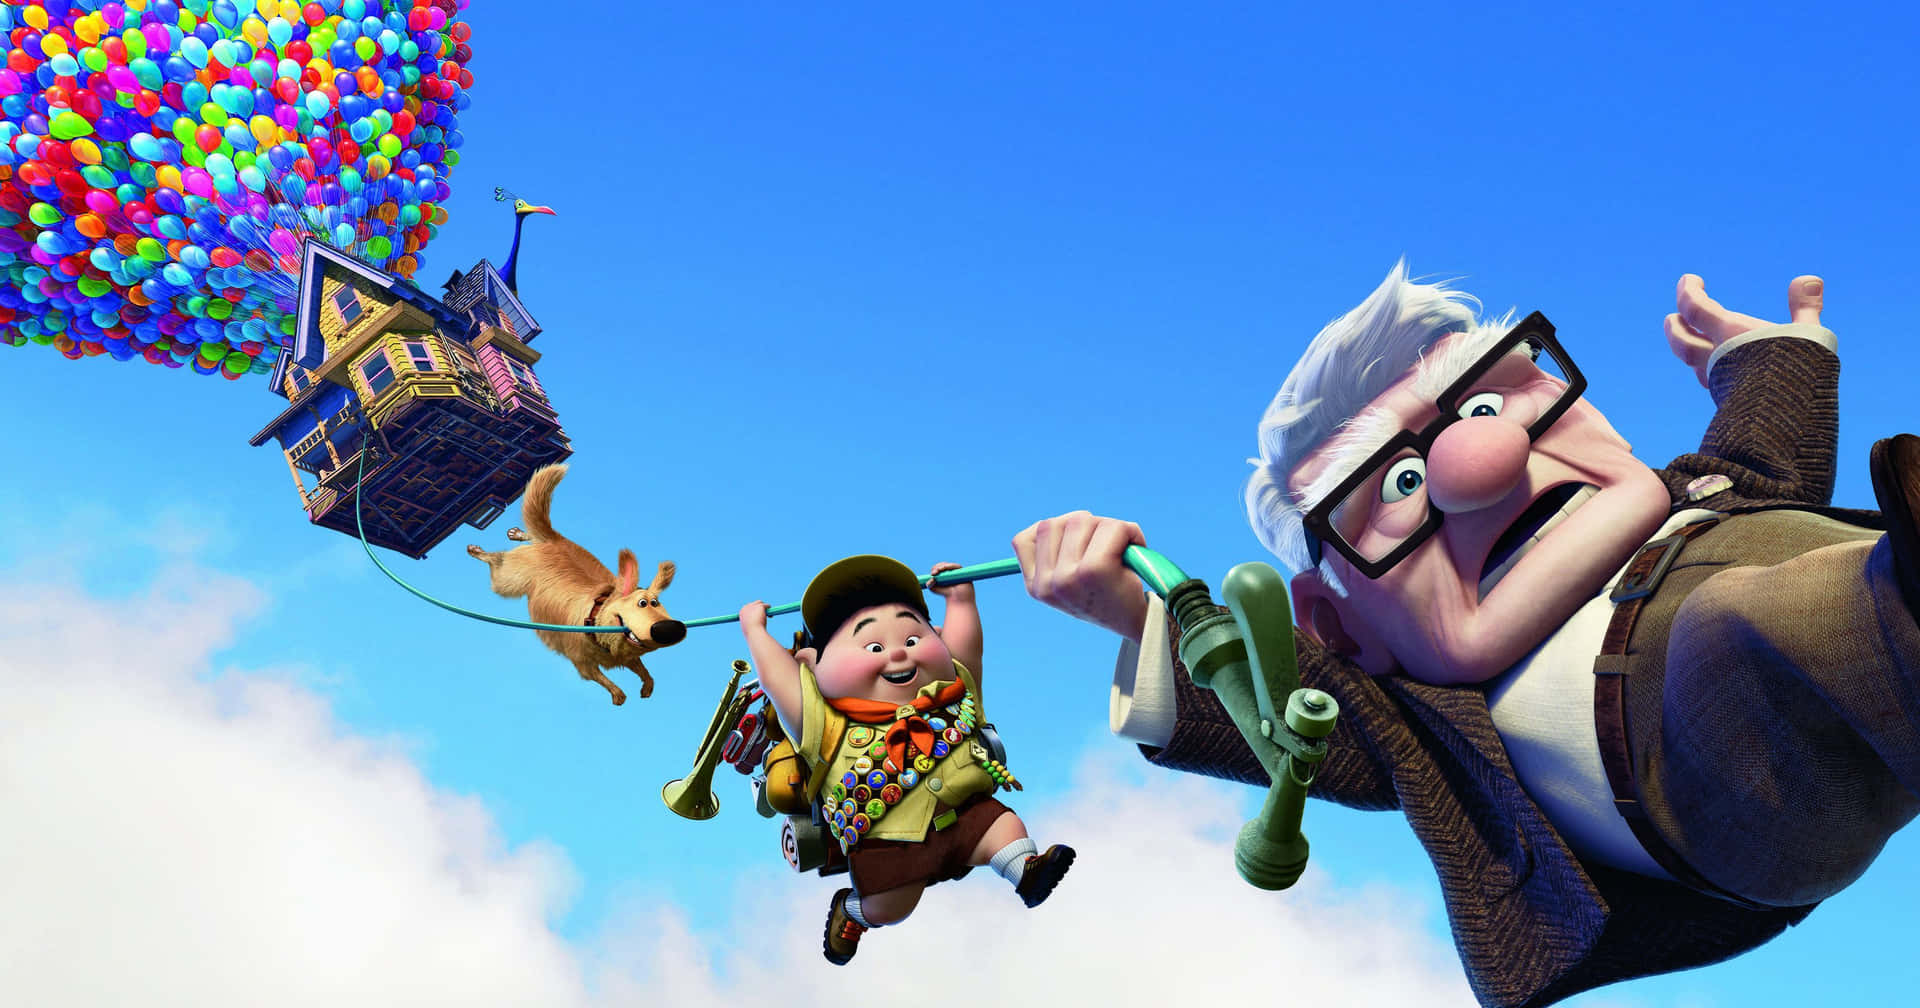 Come explore another world with "Up". Wallpaper